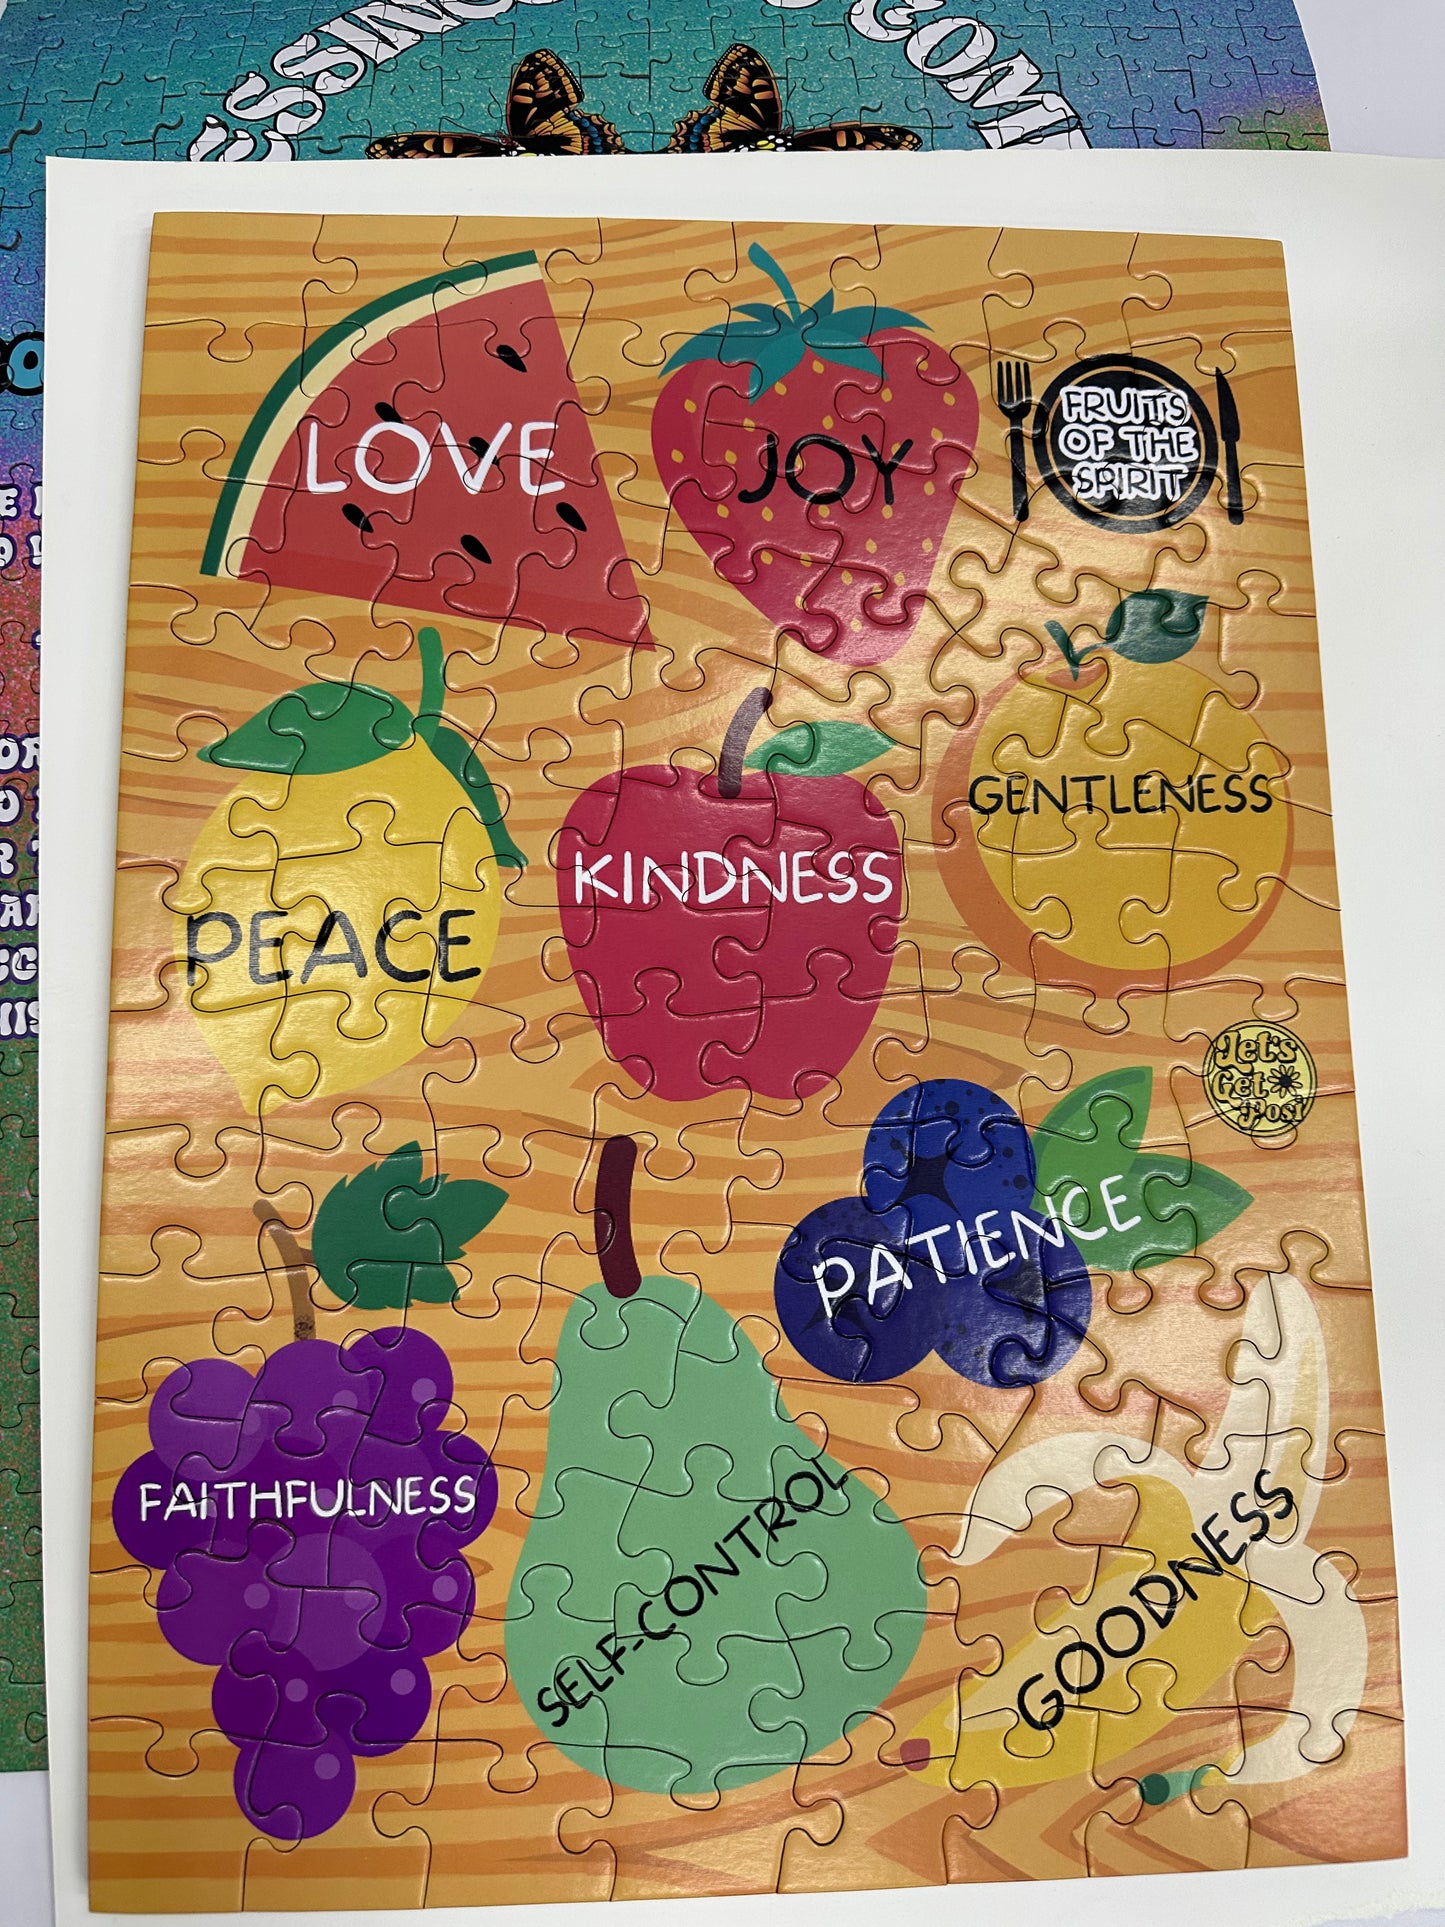 Fruits of the Spirit Puzzle (100 Pieces)